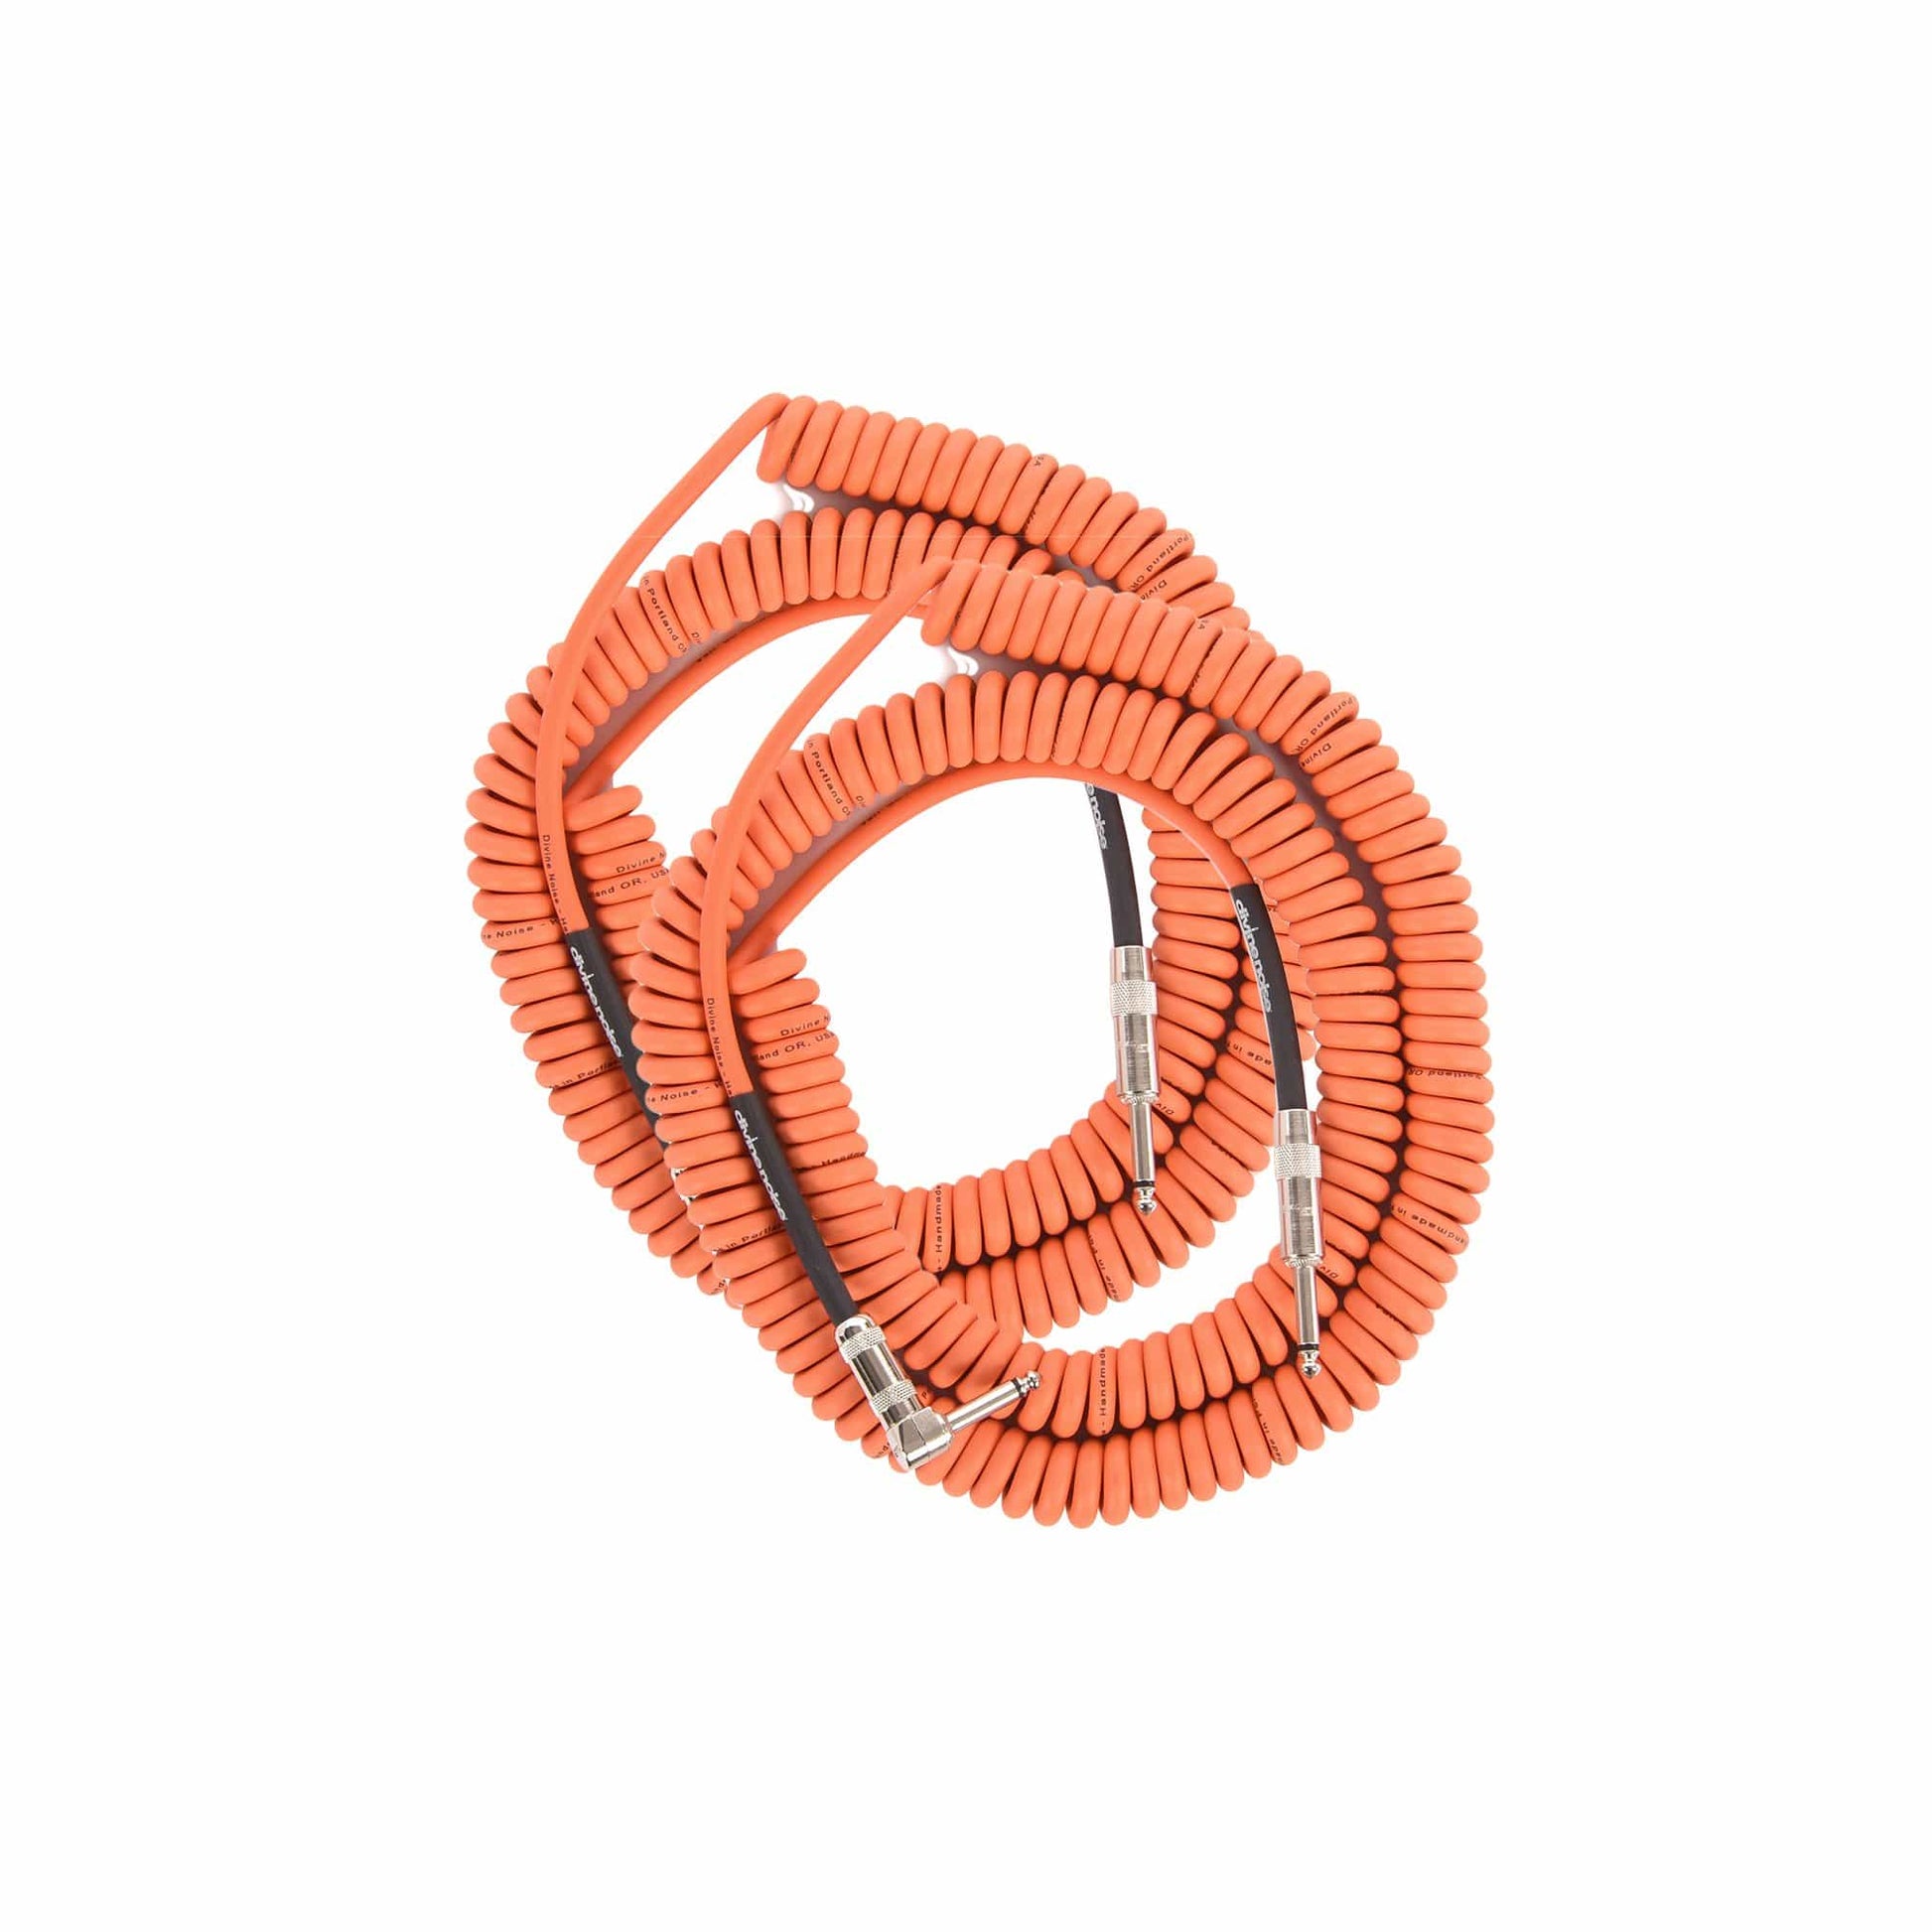 Divine Noise Curly Cable Orange 30' Straight/Right Angle 2 Pack Bundle Accessories / Cables